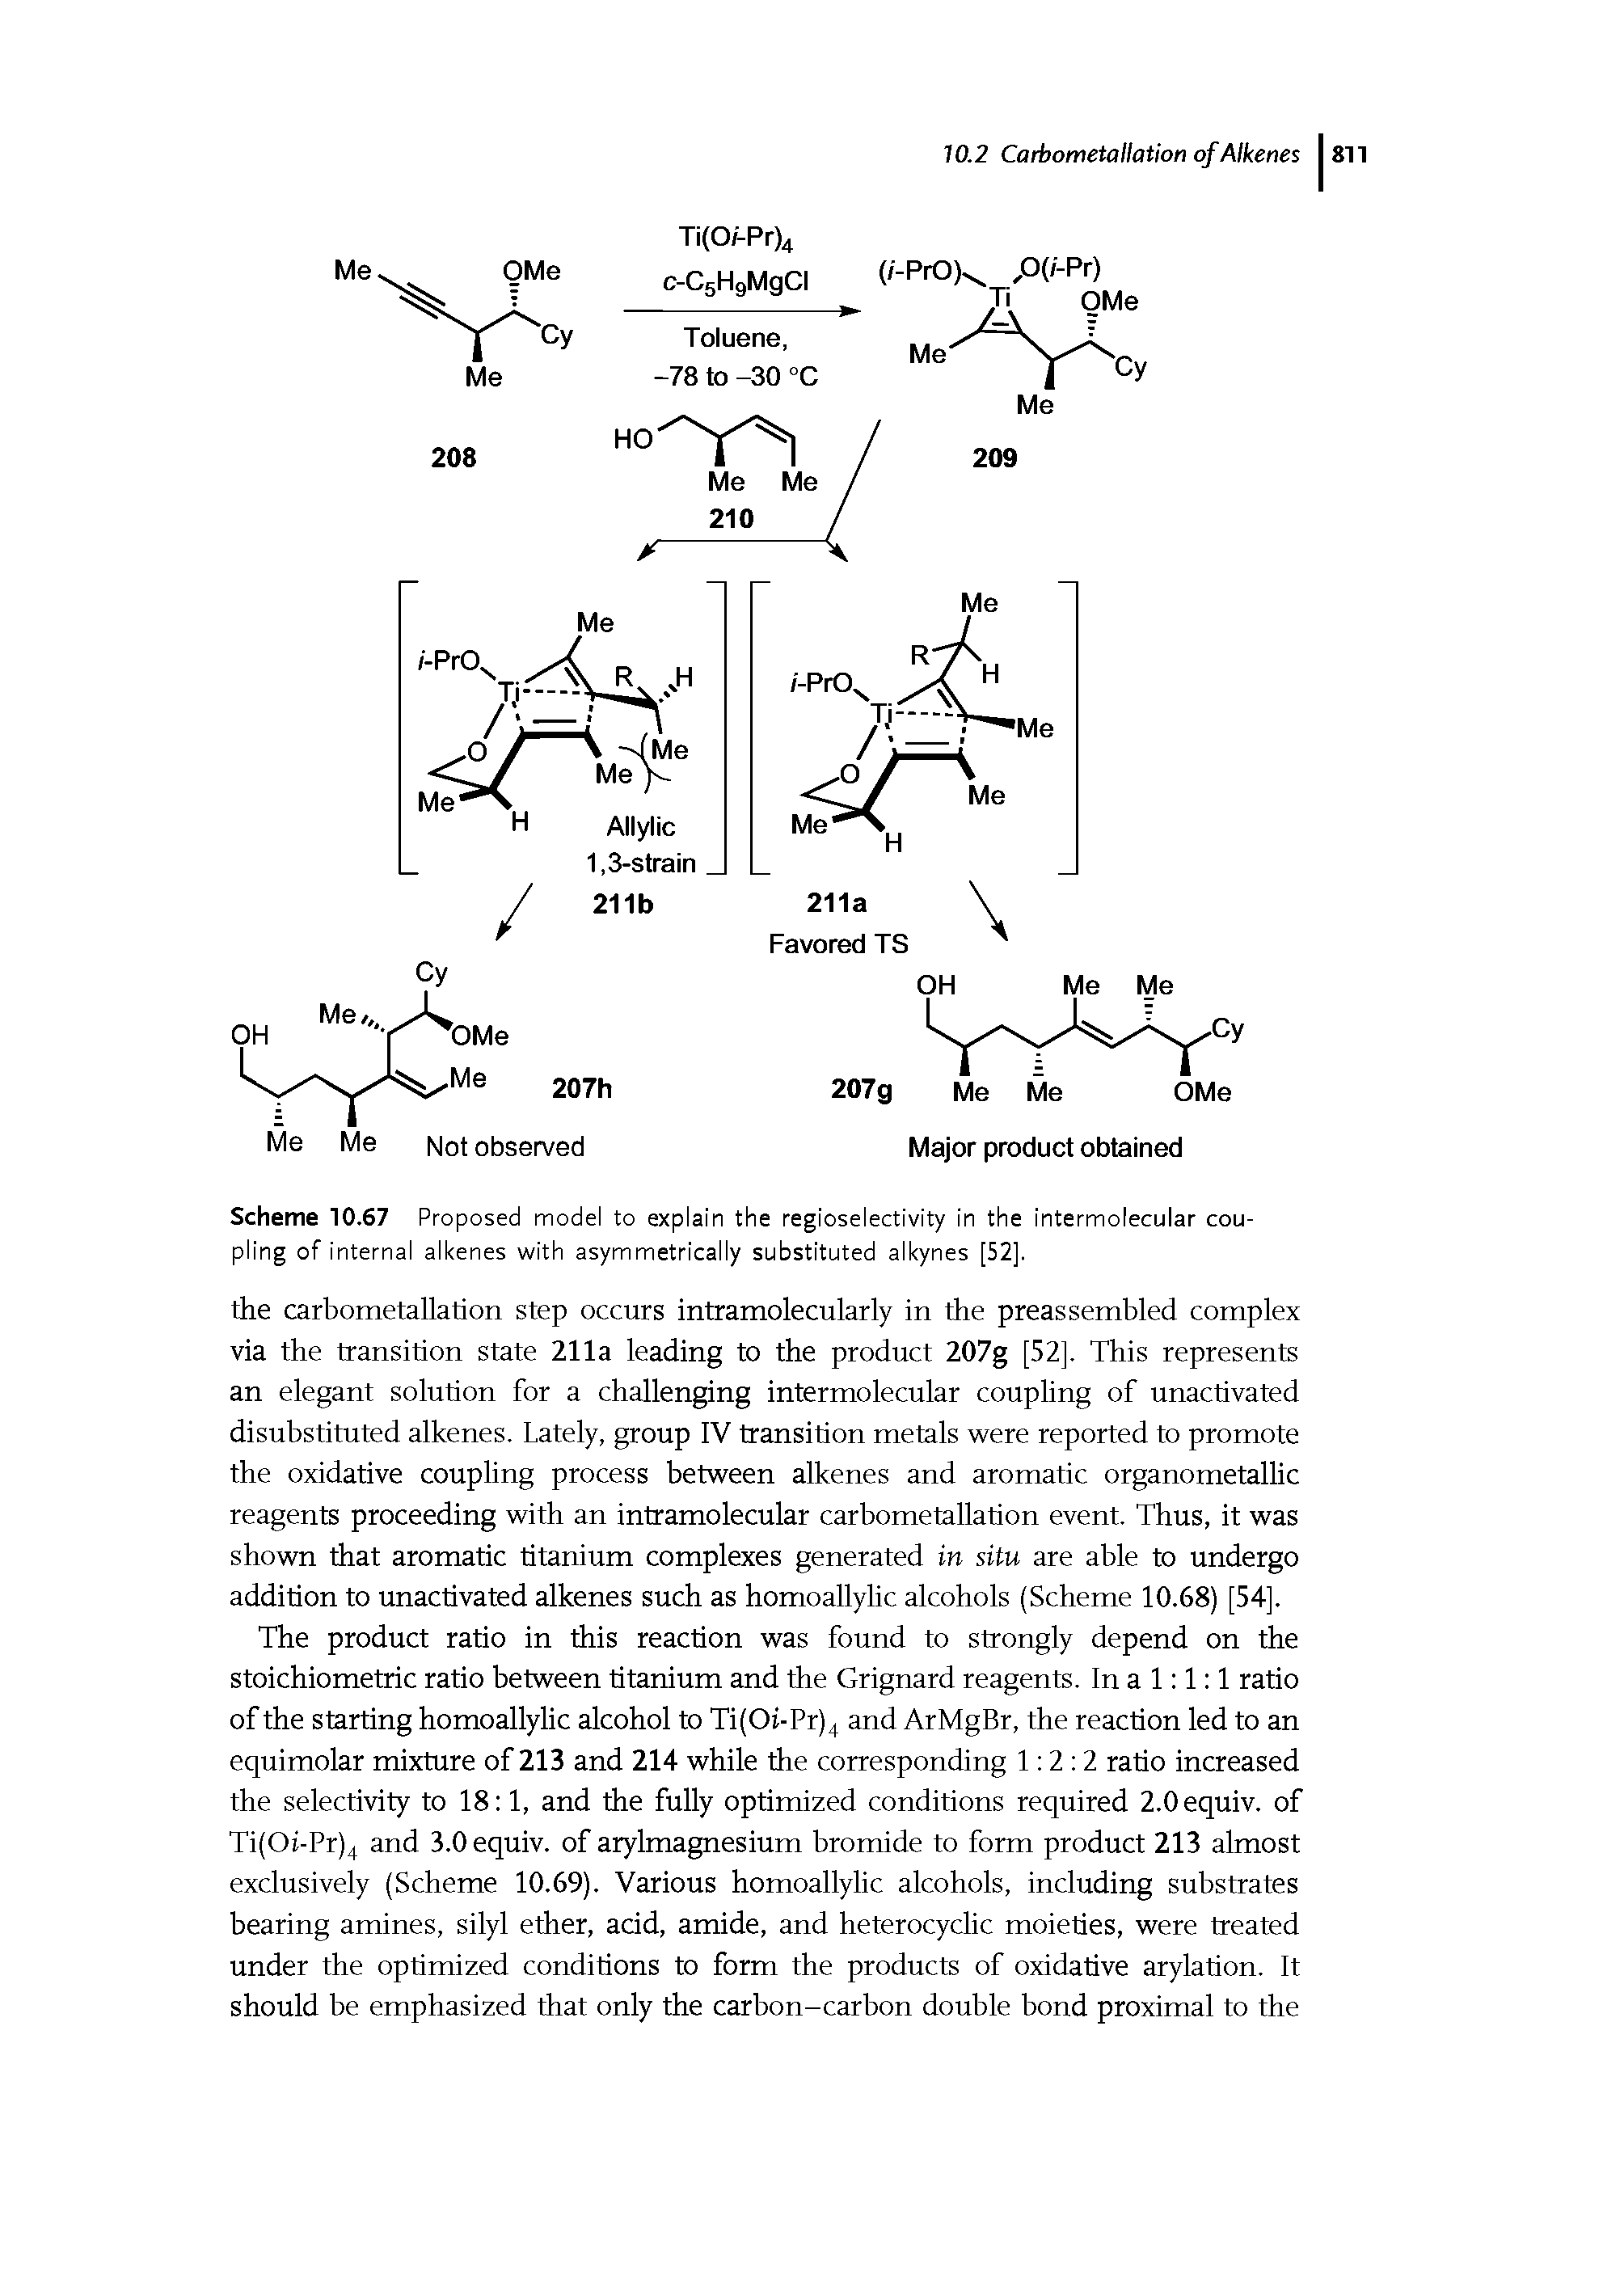 Scheme 10.67 Proposed model to explain the regioselectivity in the intermolecular coupling of internal alkenes with asymmetrically substituted alkynes [52].